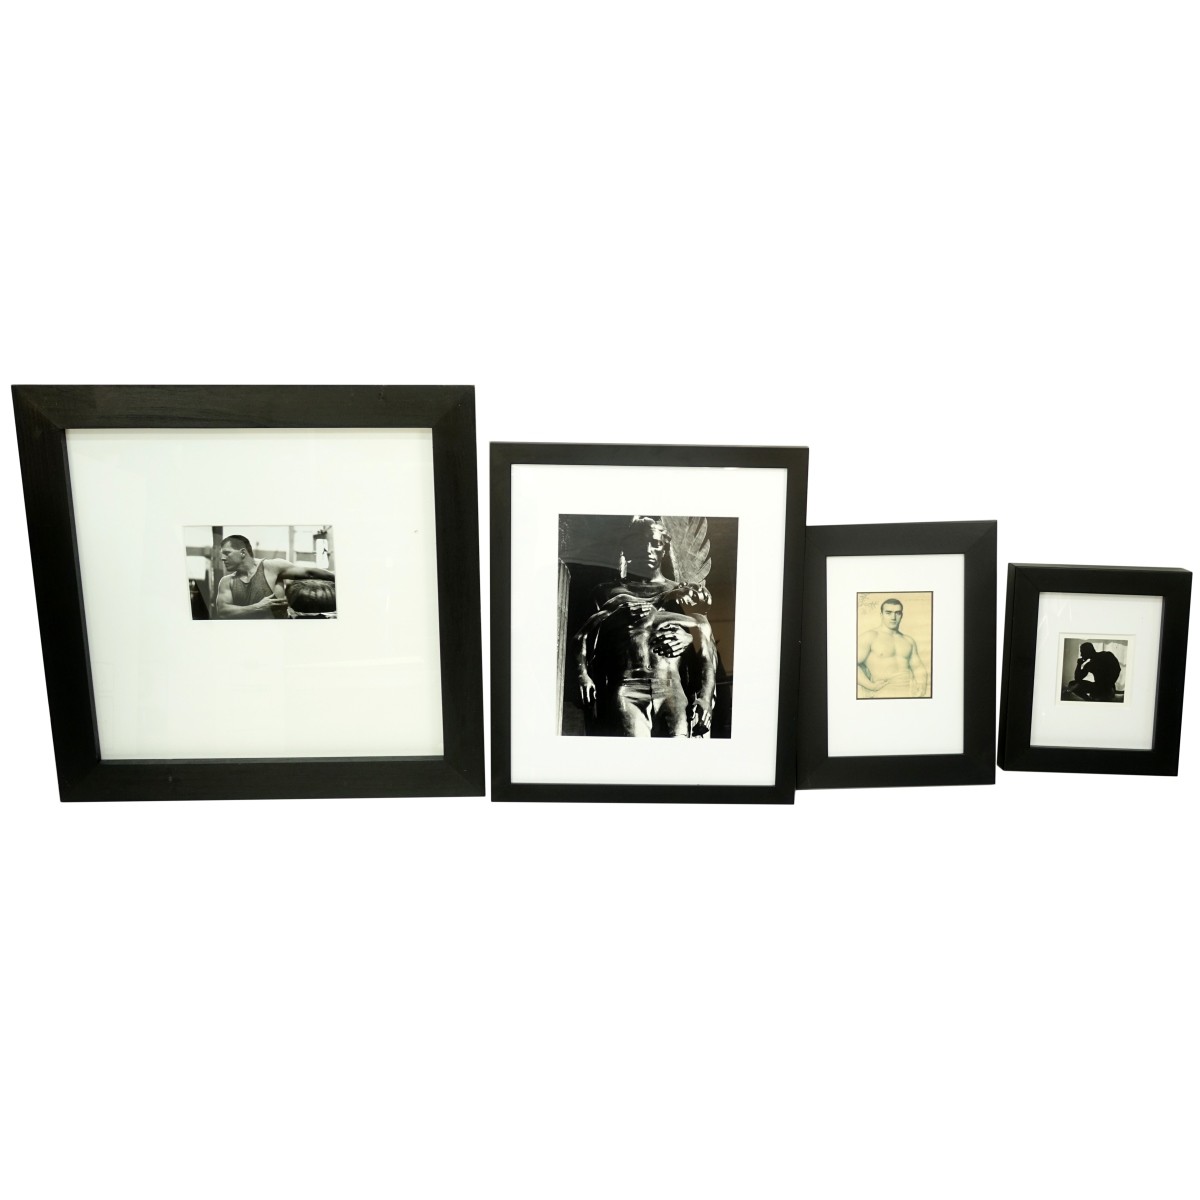 Four (4) Prints on Paper of Male Subjects